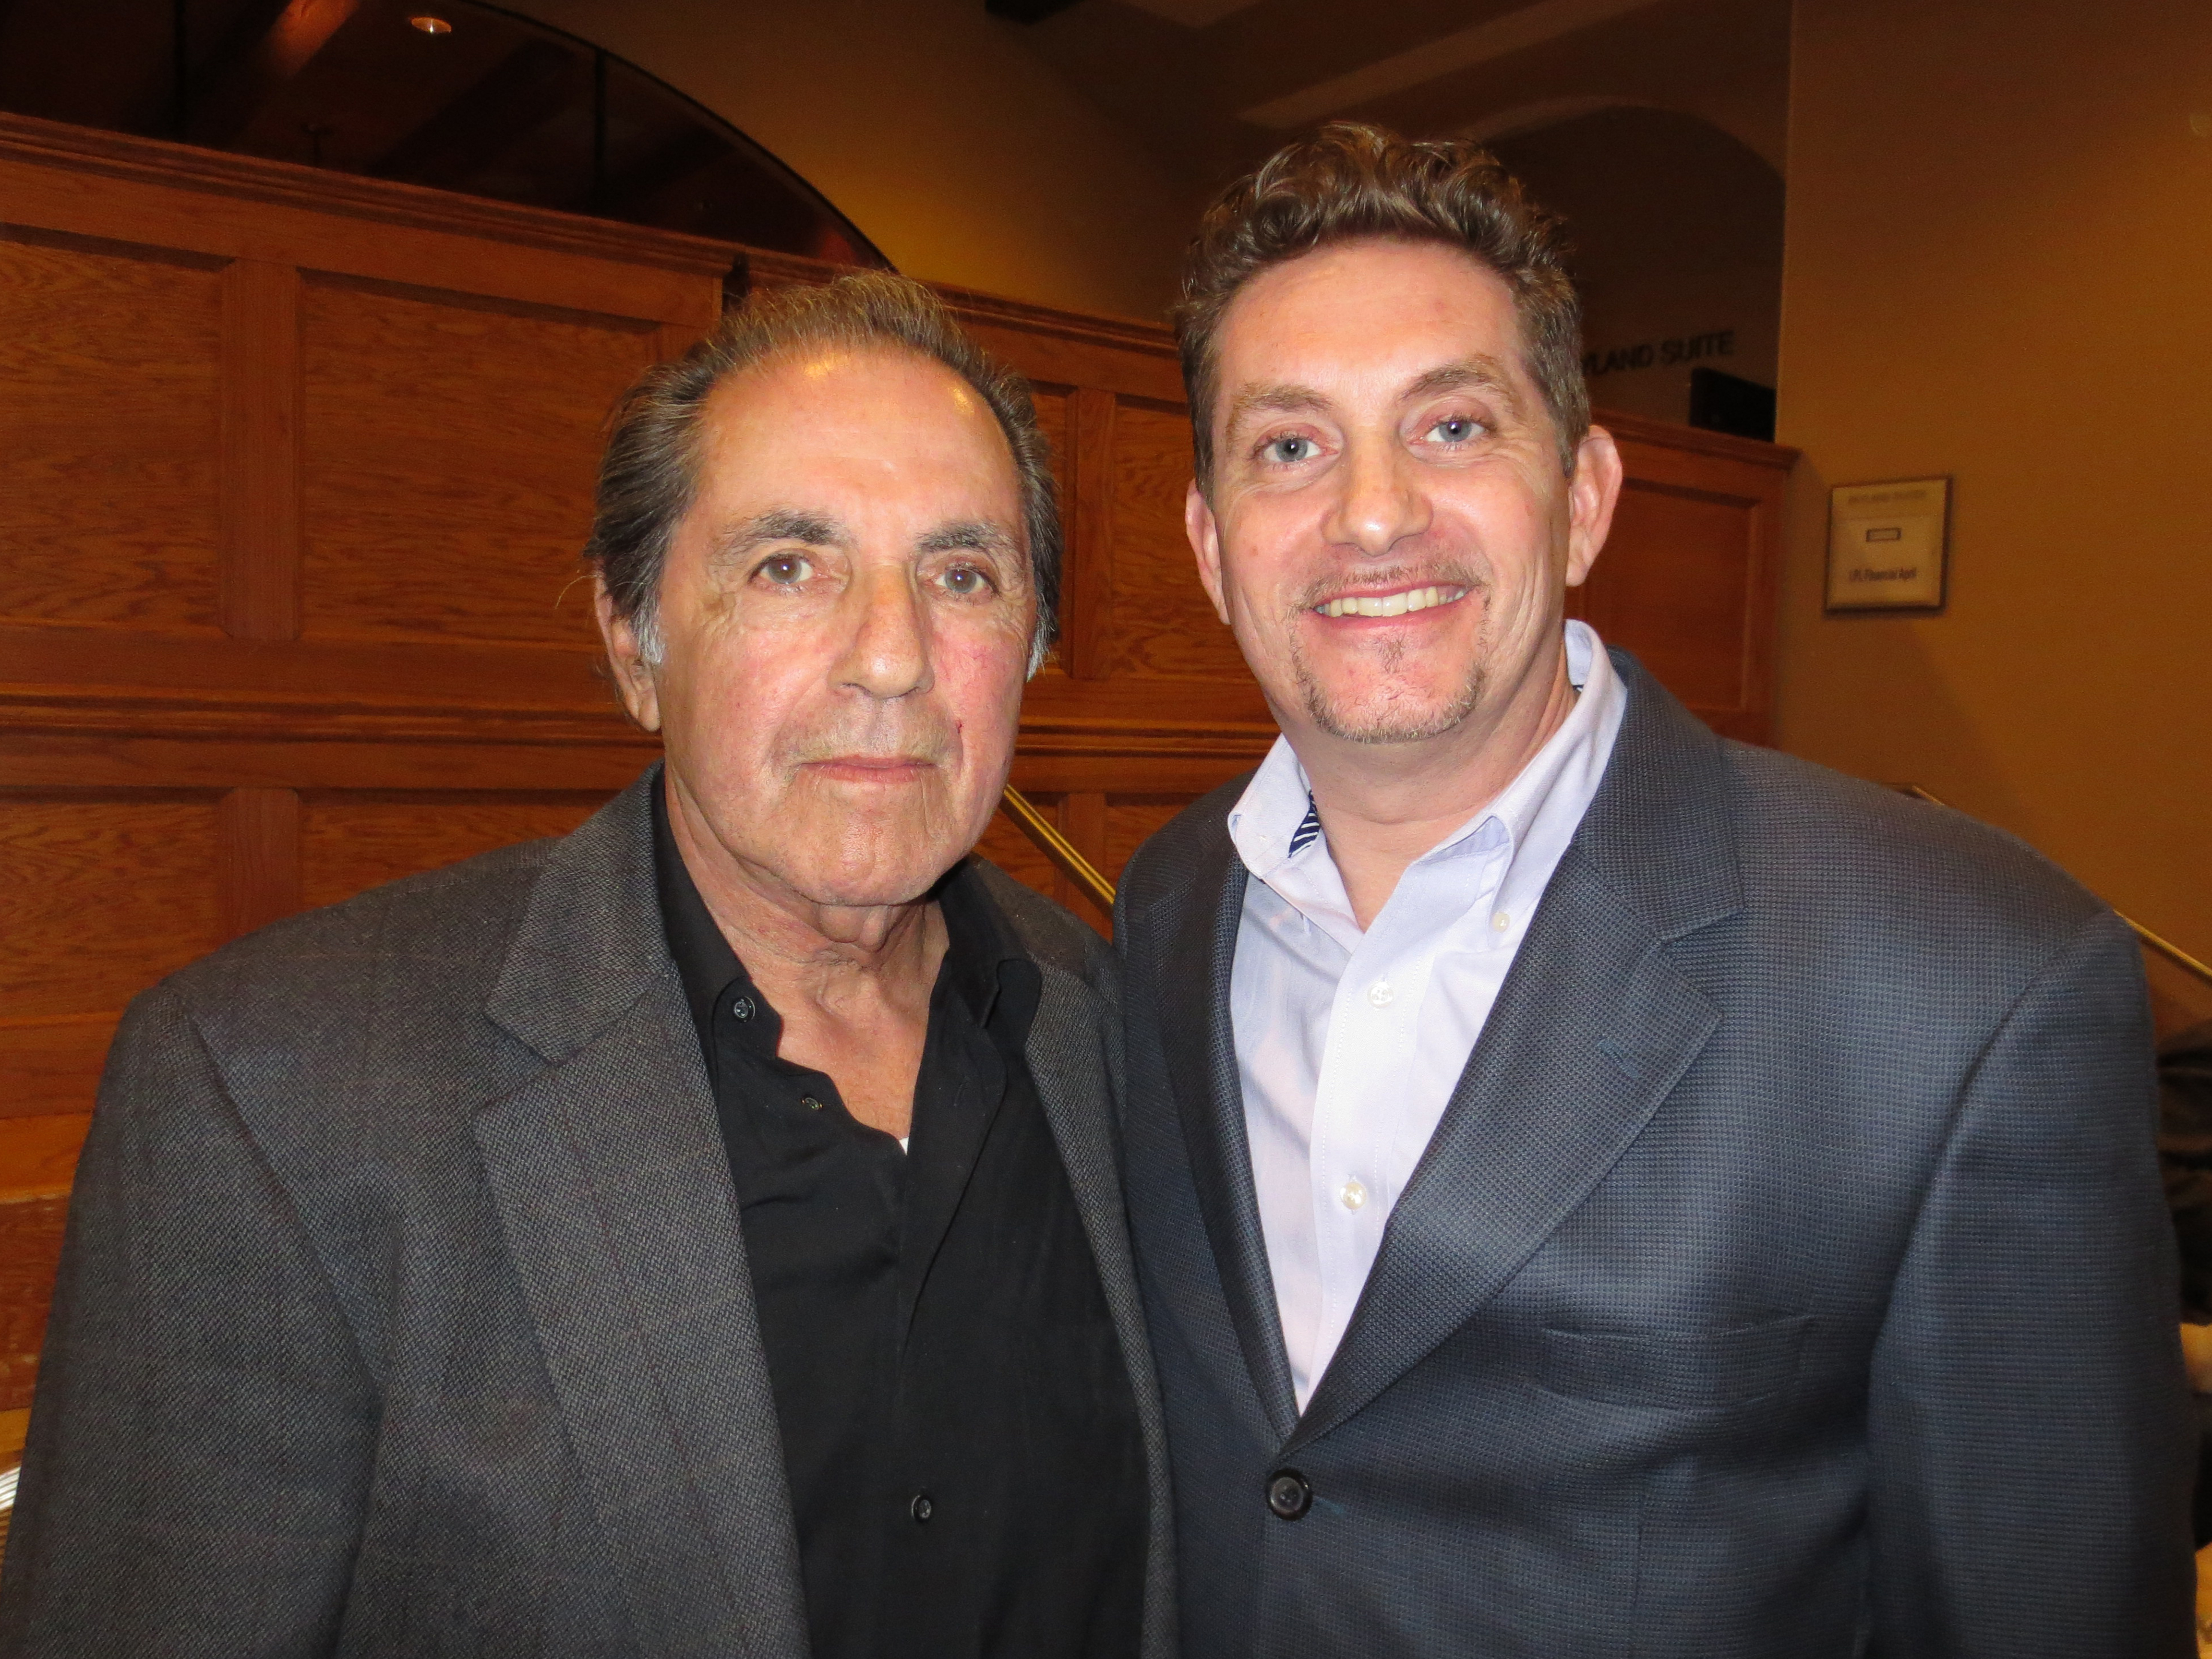 Sopranos and Mean Streets star David Proval and actor Michael Christaldi.